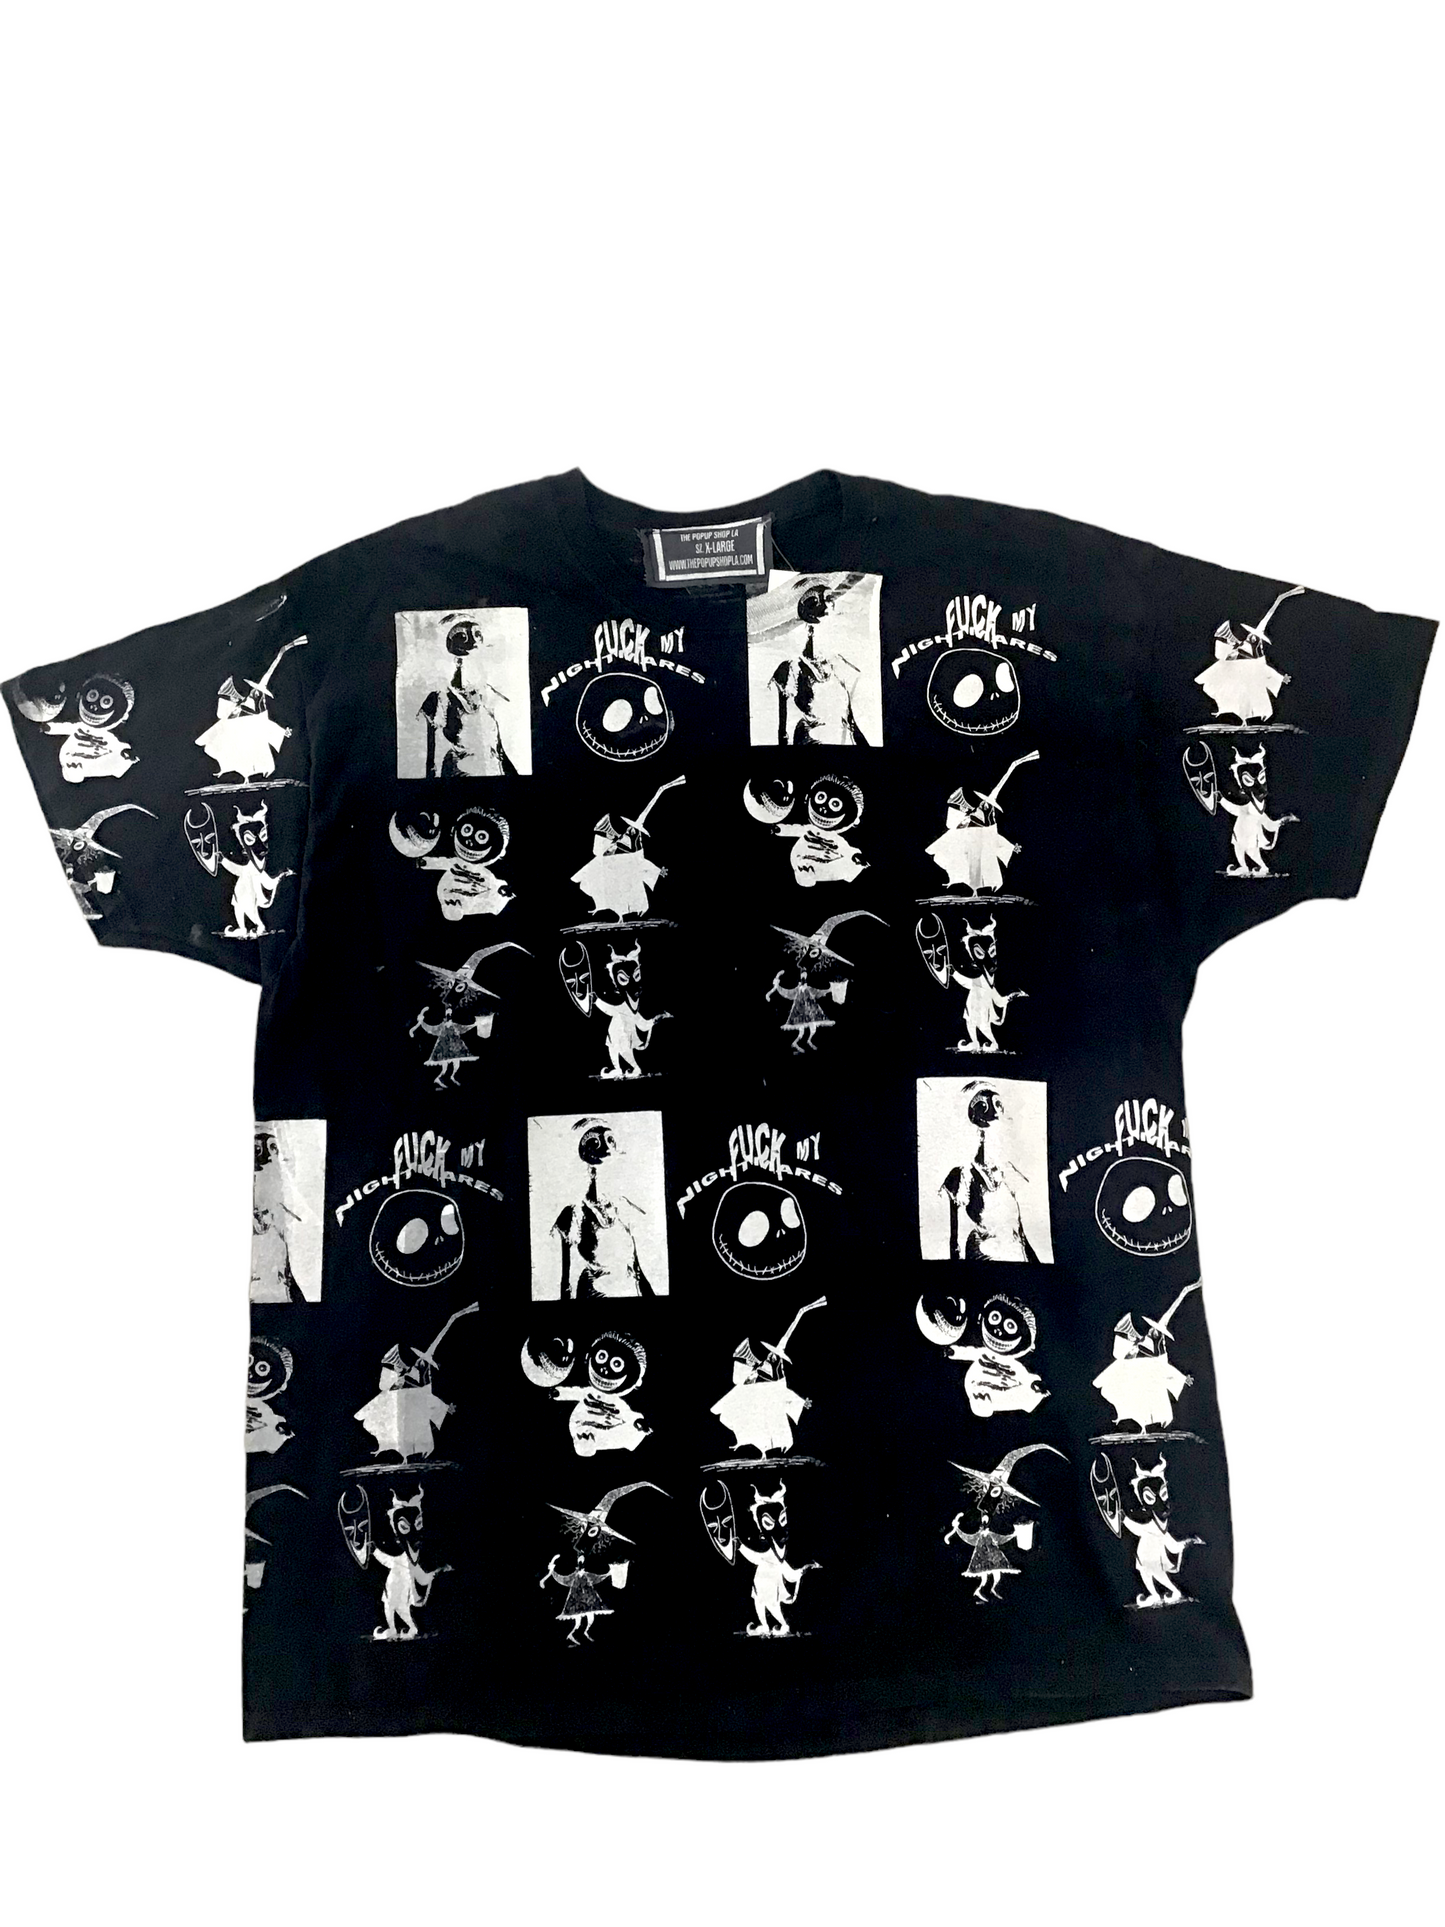 Nightmare before Christmas F**k My Nightmares all over print T shirt